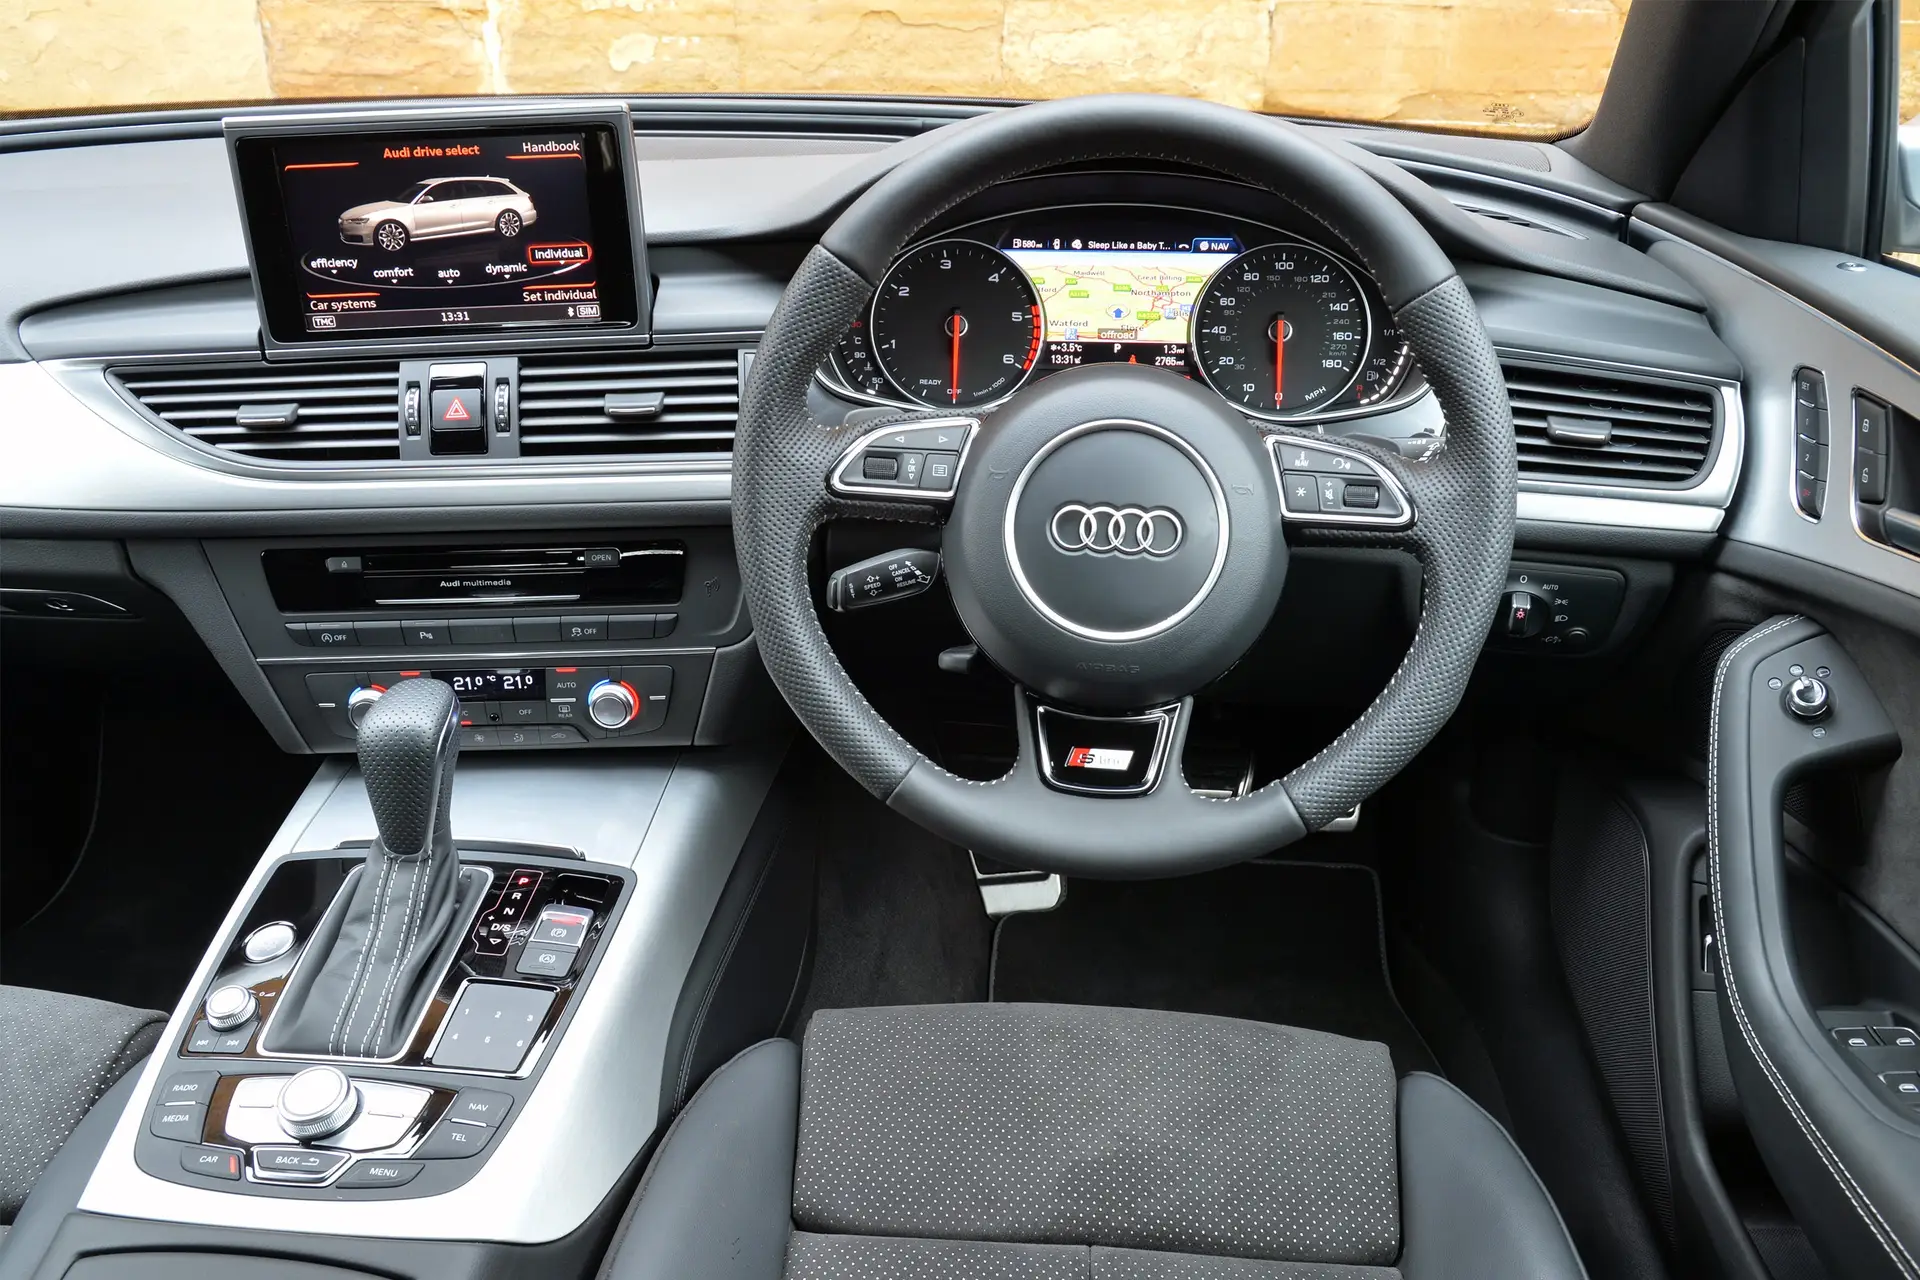 Audi A6 Avant (2011-2018) Review: interior close up photo of the Audi A6 Avant dashboard